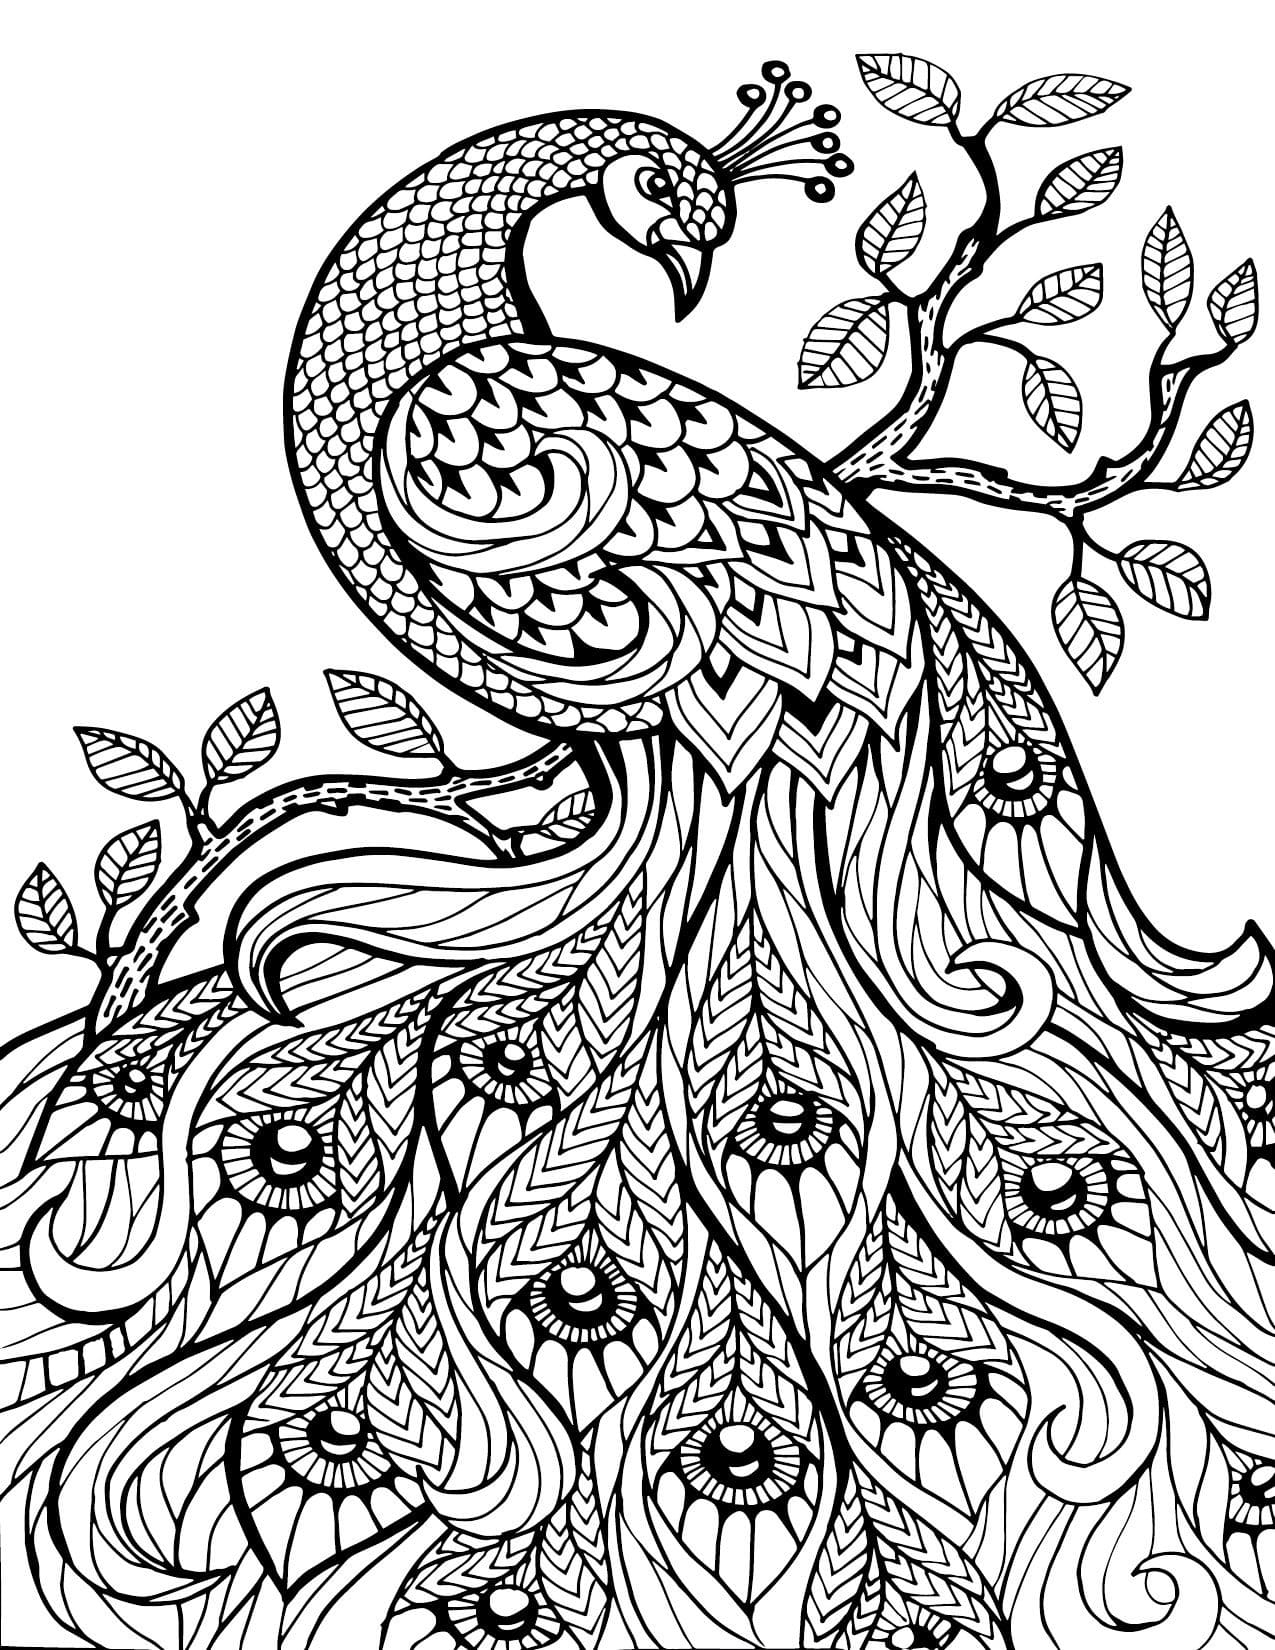 Raskrasil.com-Coloring-Pages-Animal-for-Adults-84